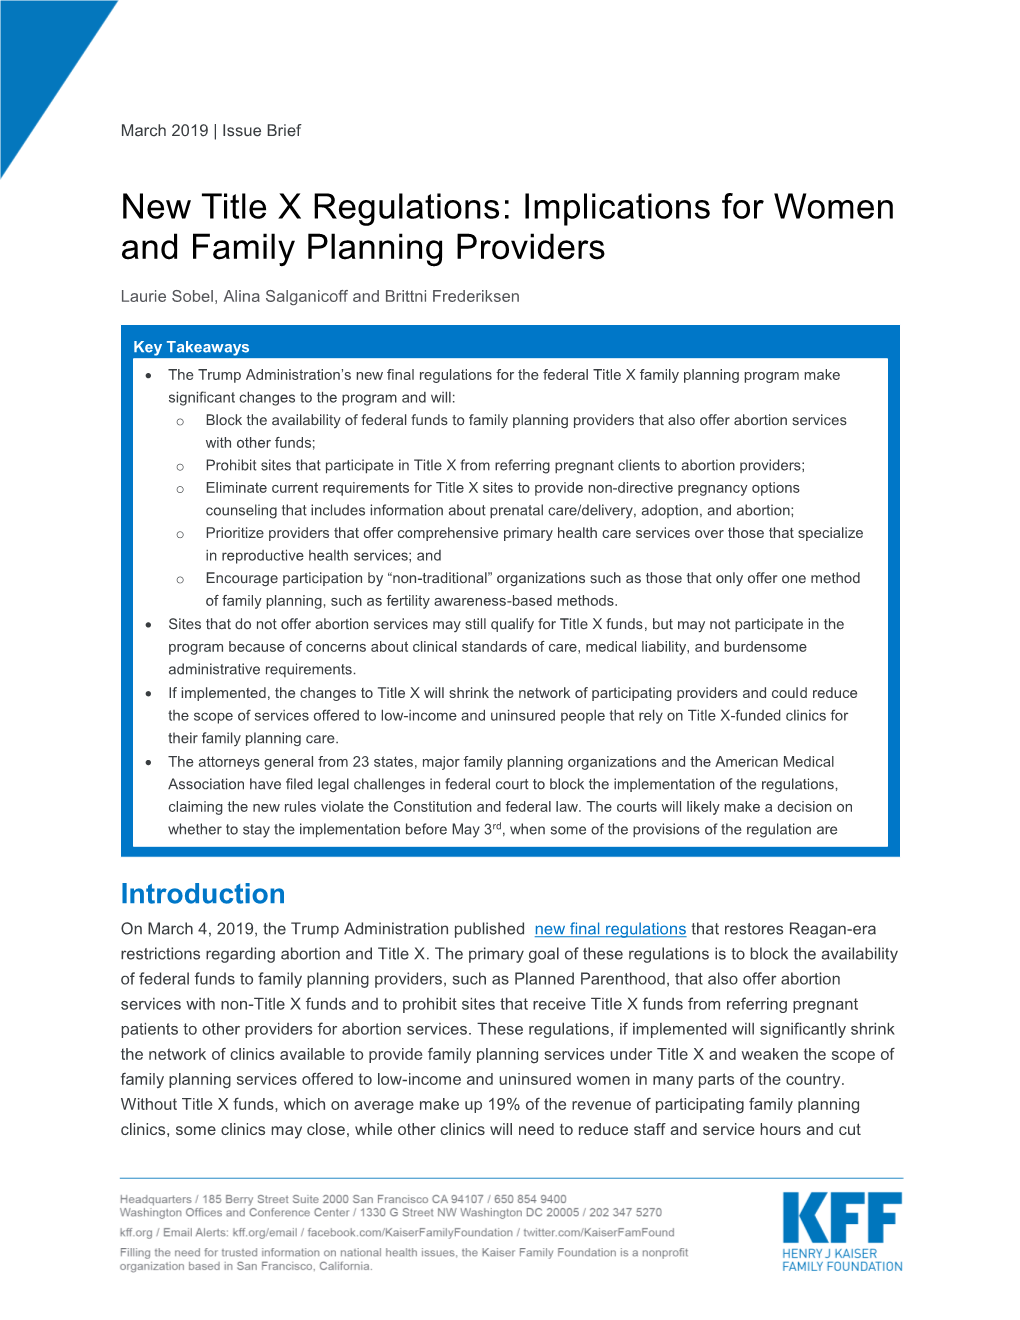 New Title X Regulations: Implications for Women and Family Planning Providers